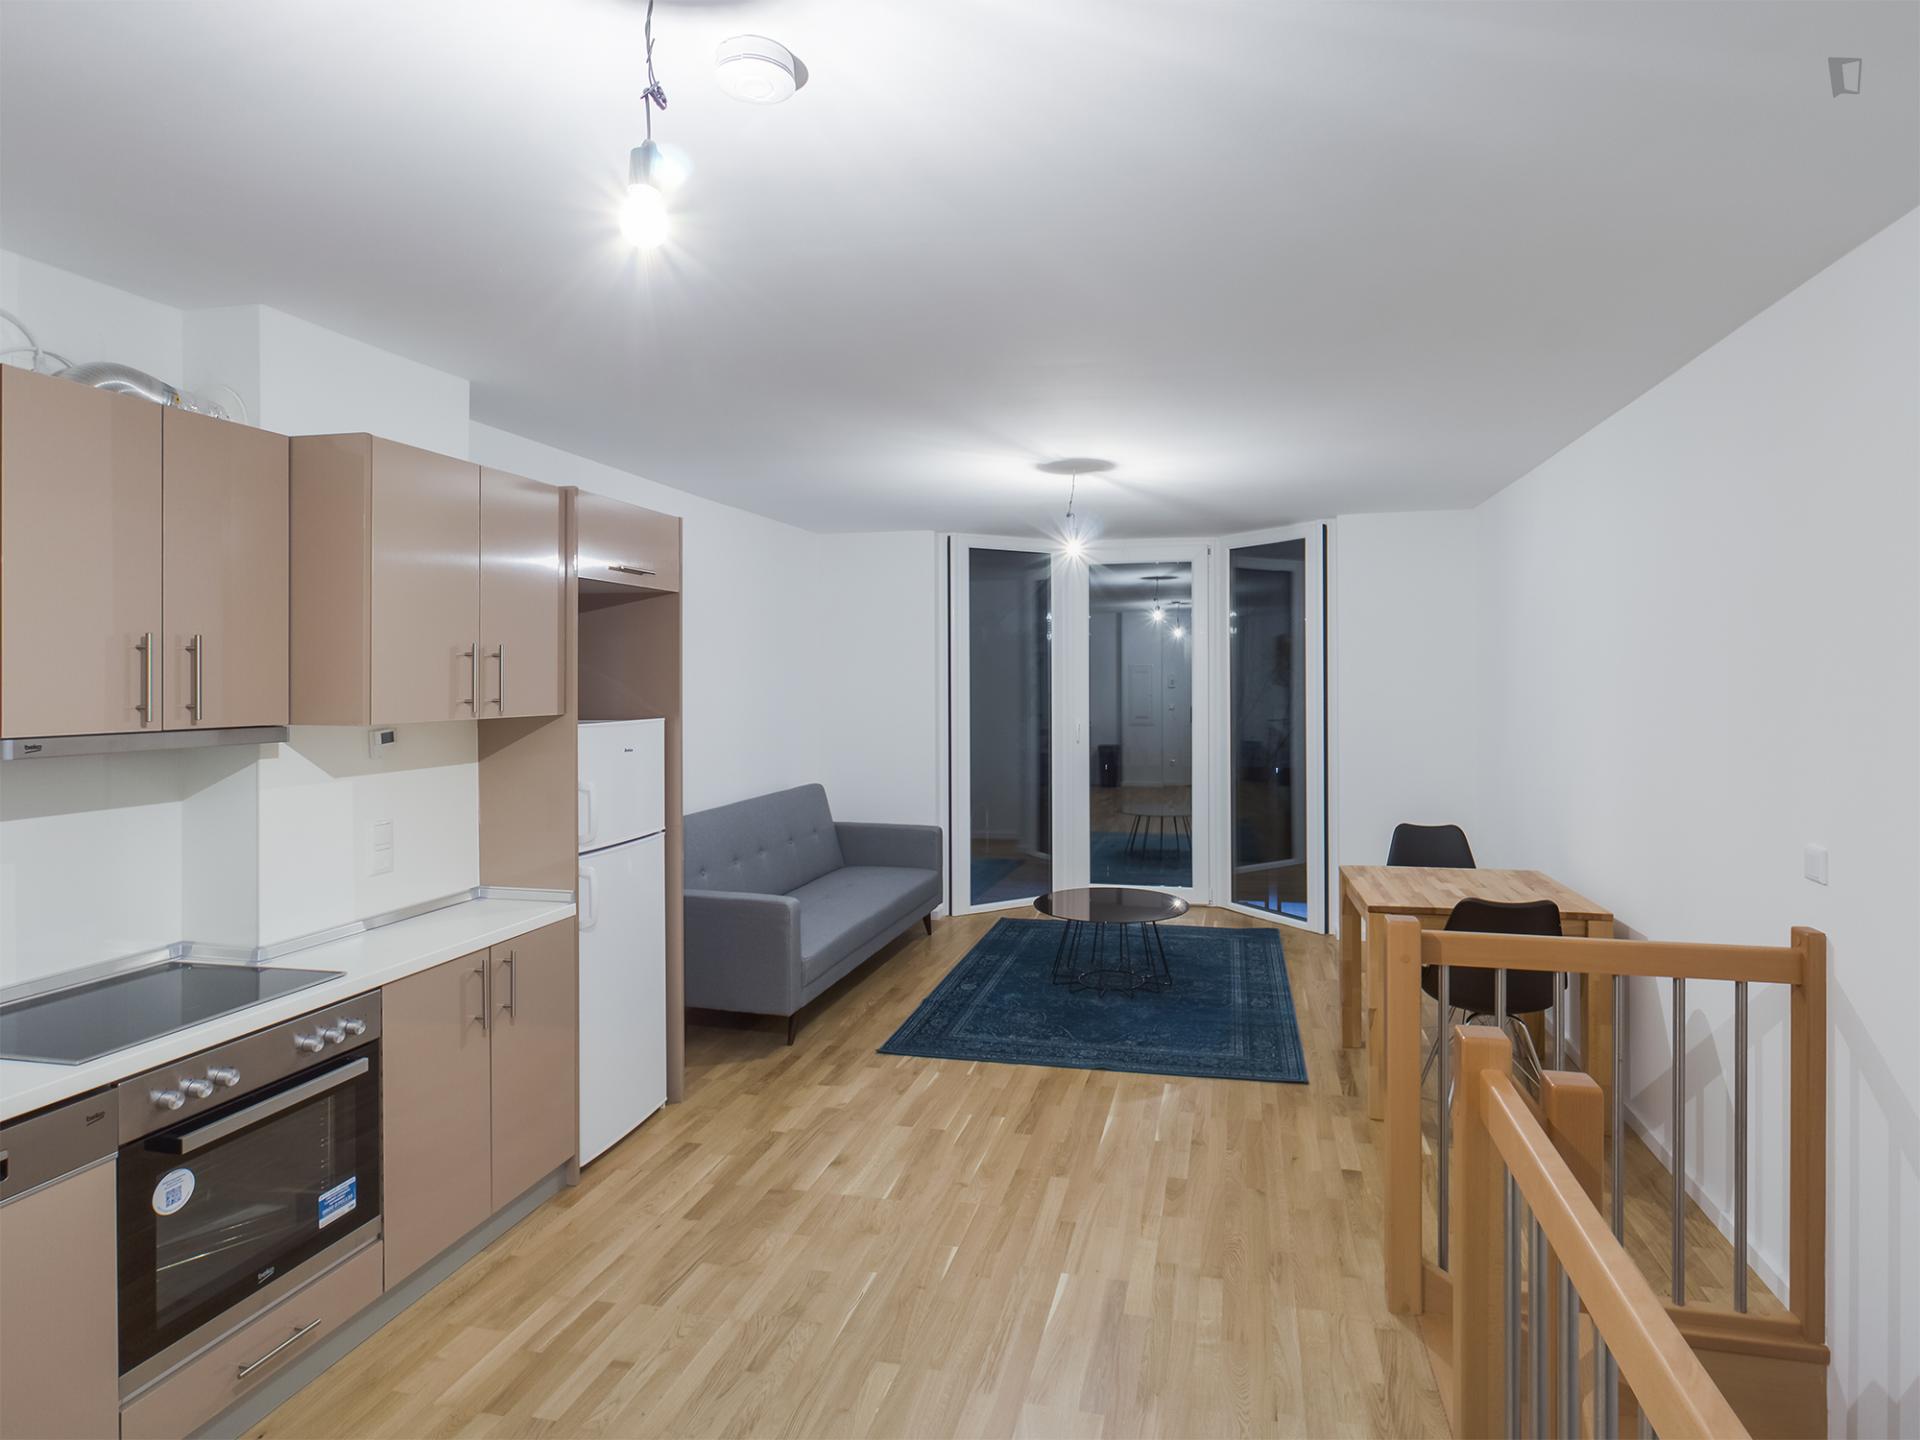 Malteser 2 - Furnished apartment in Berlin for expats